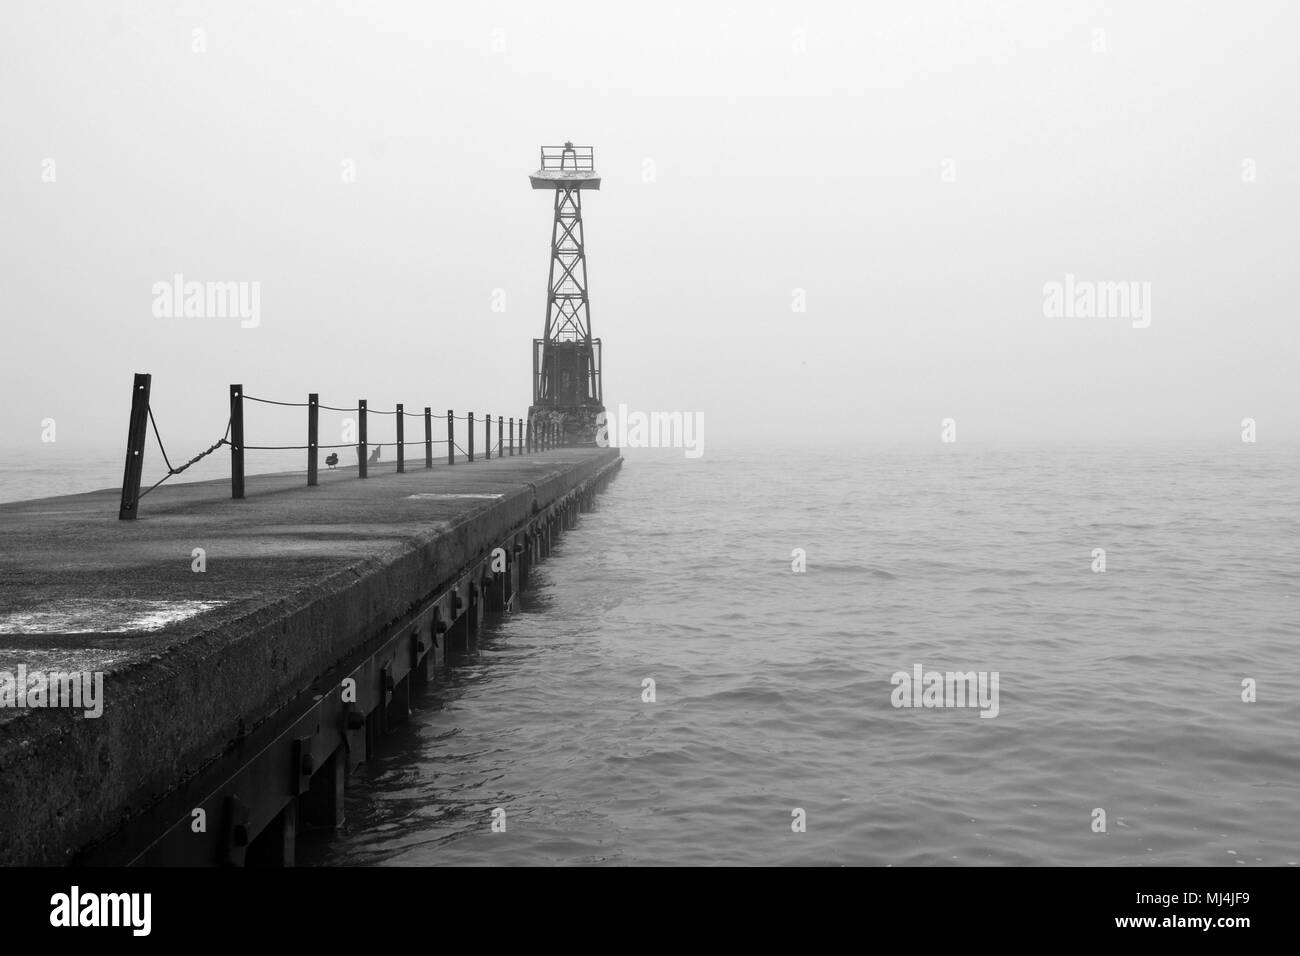 Fog and rain create poor visibility at the Foster Avenue Beach break wall signal tower on Lake Michigan in Chicago's north side Uptown neighborhood Stock Photo